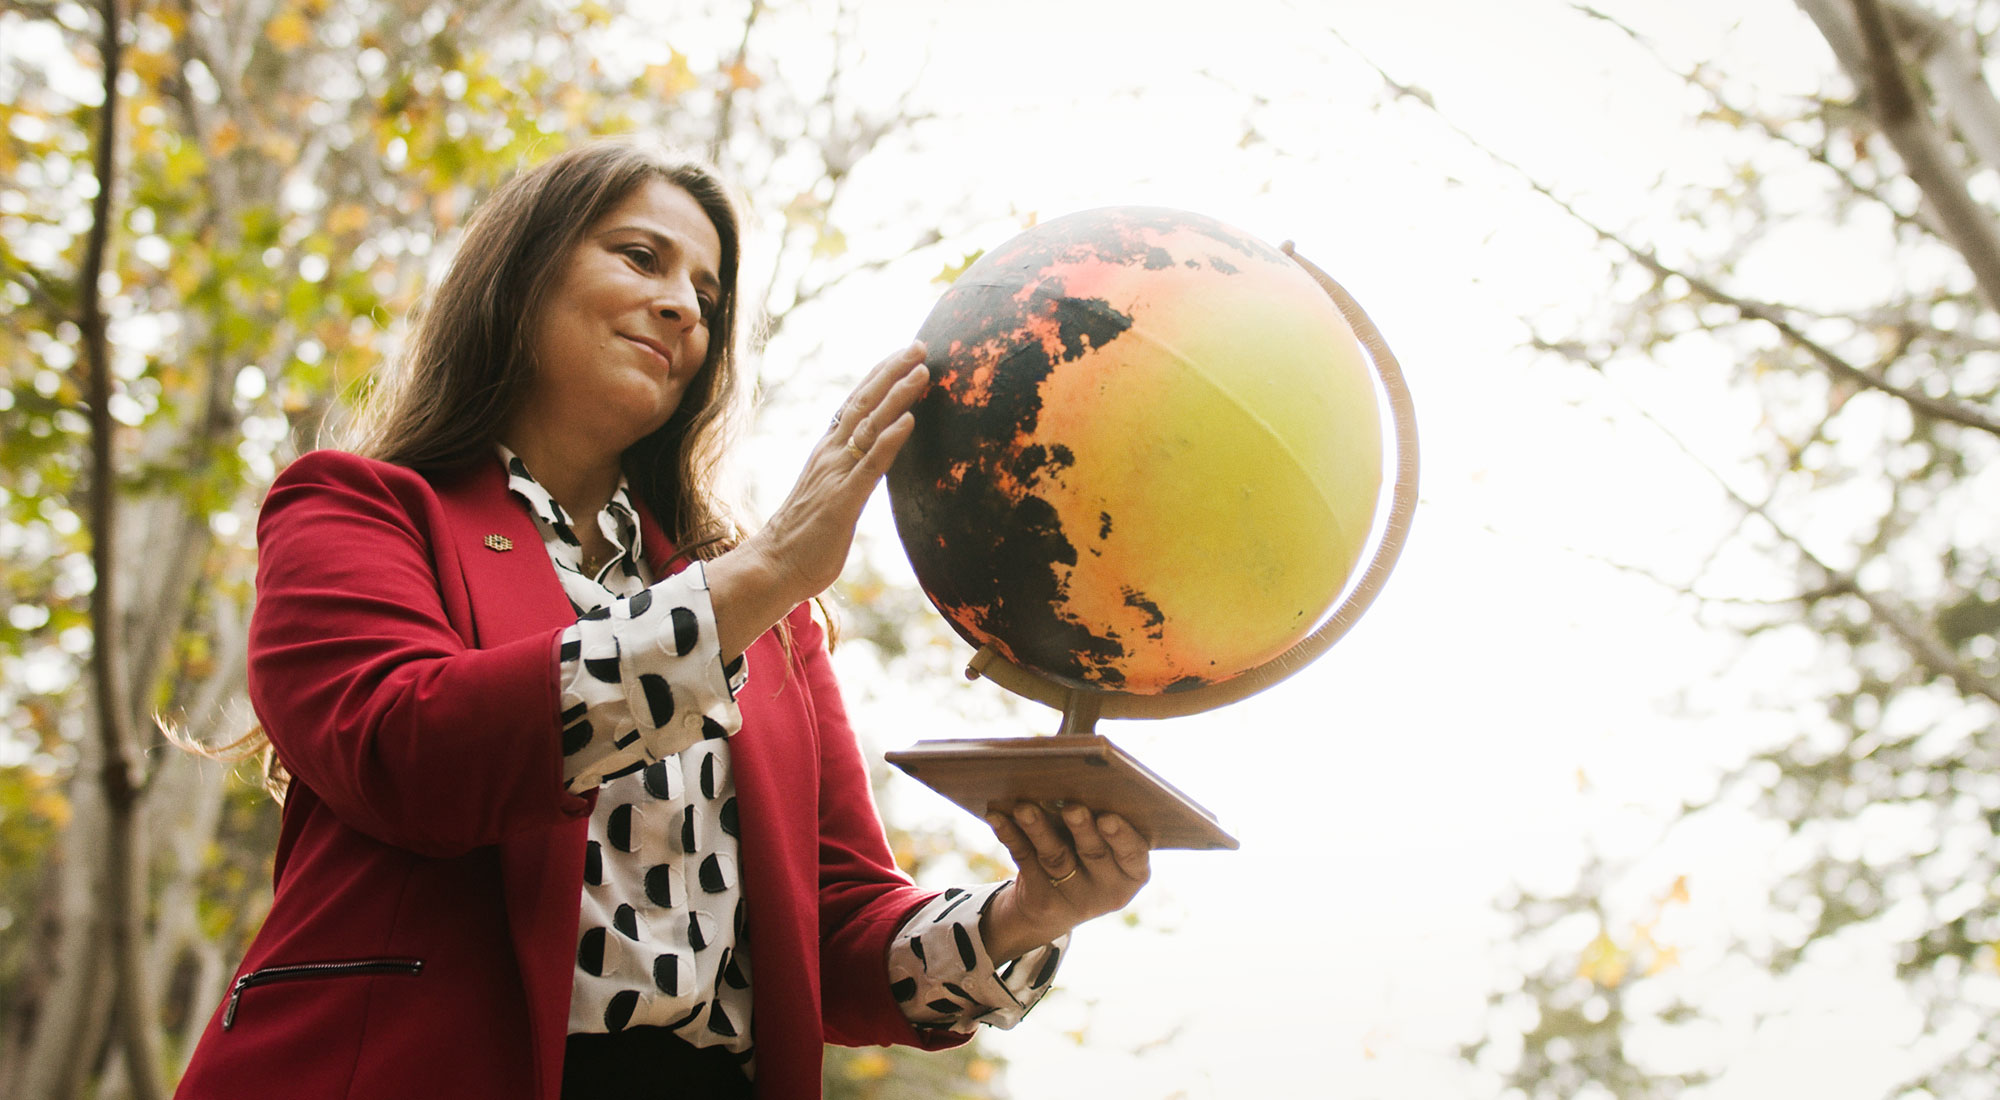 The photo shows Natalie Batalha standing among trees, holding a yellow globe.